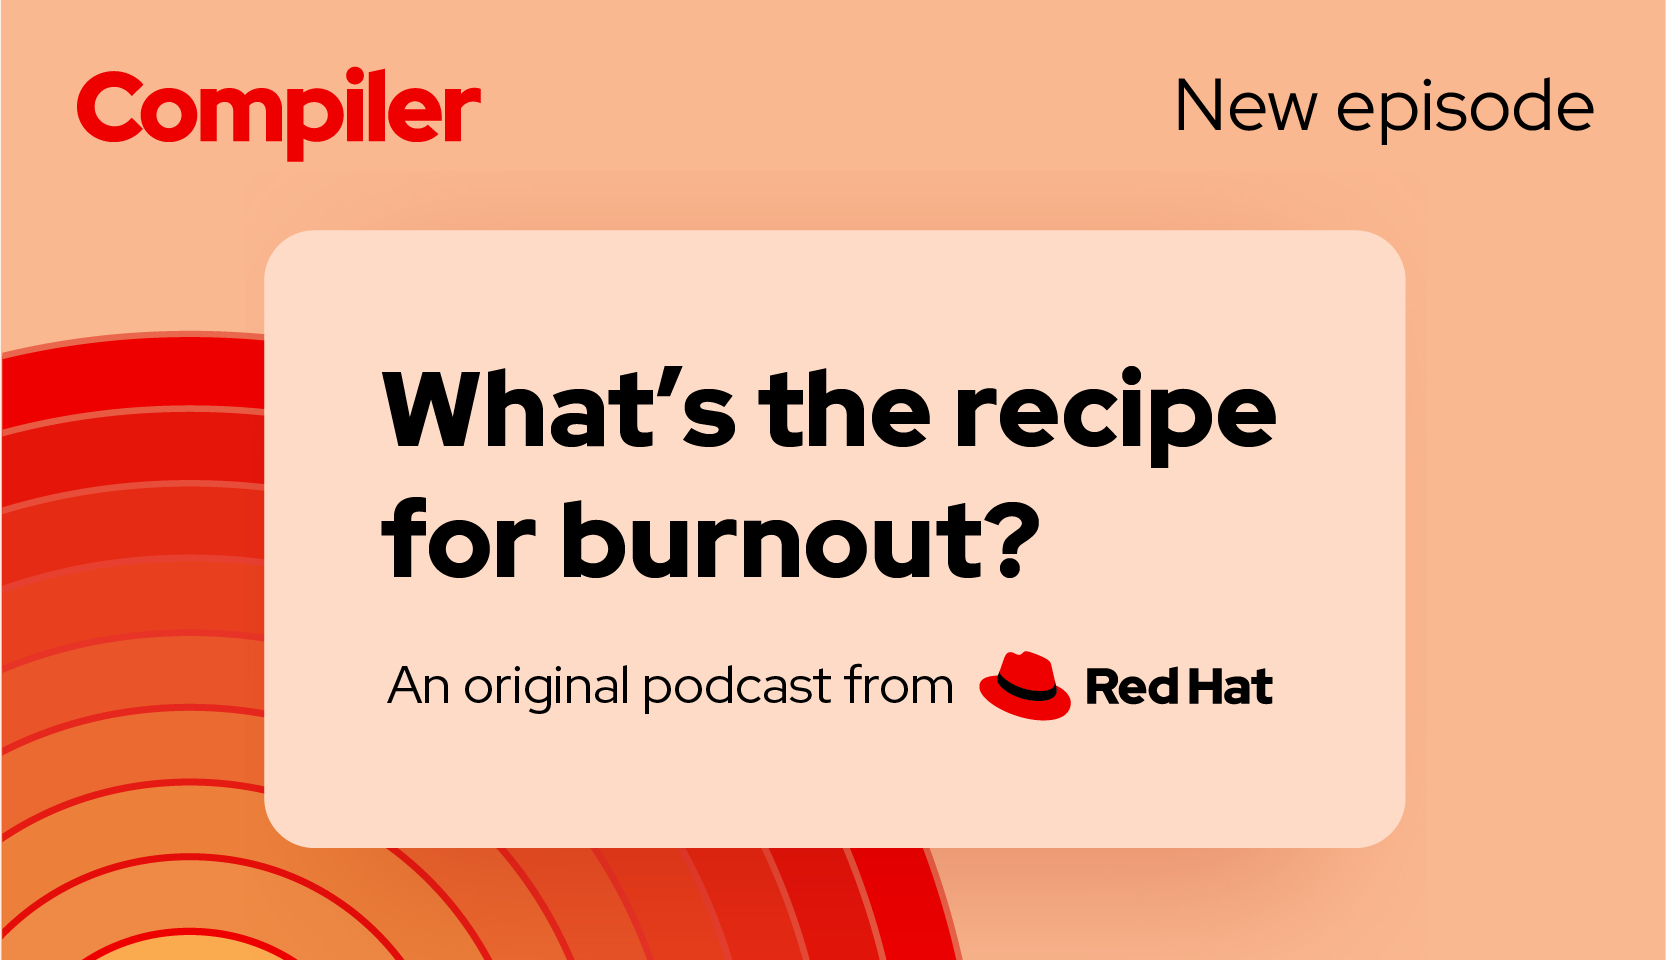 An ad for the Compiler podcast featuring the text “An original podcast from Red Hat” and the Red Hat logo.